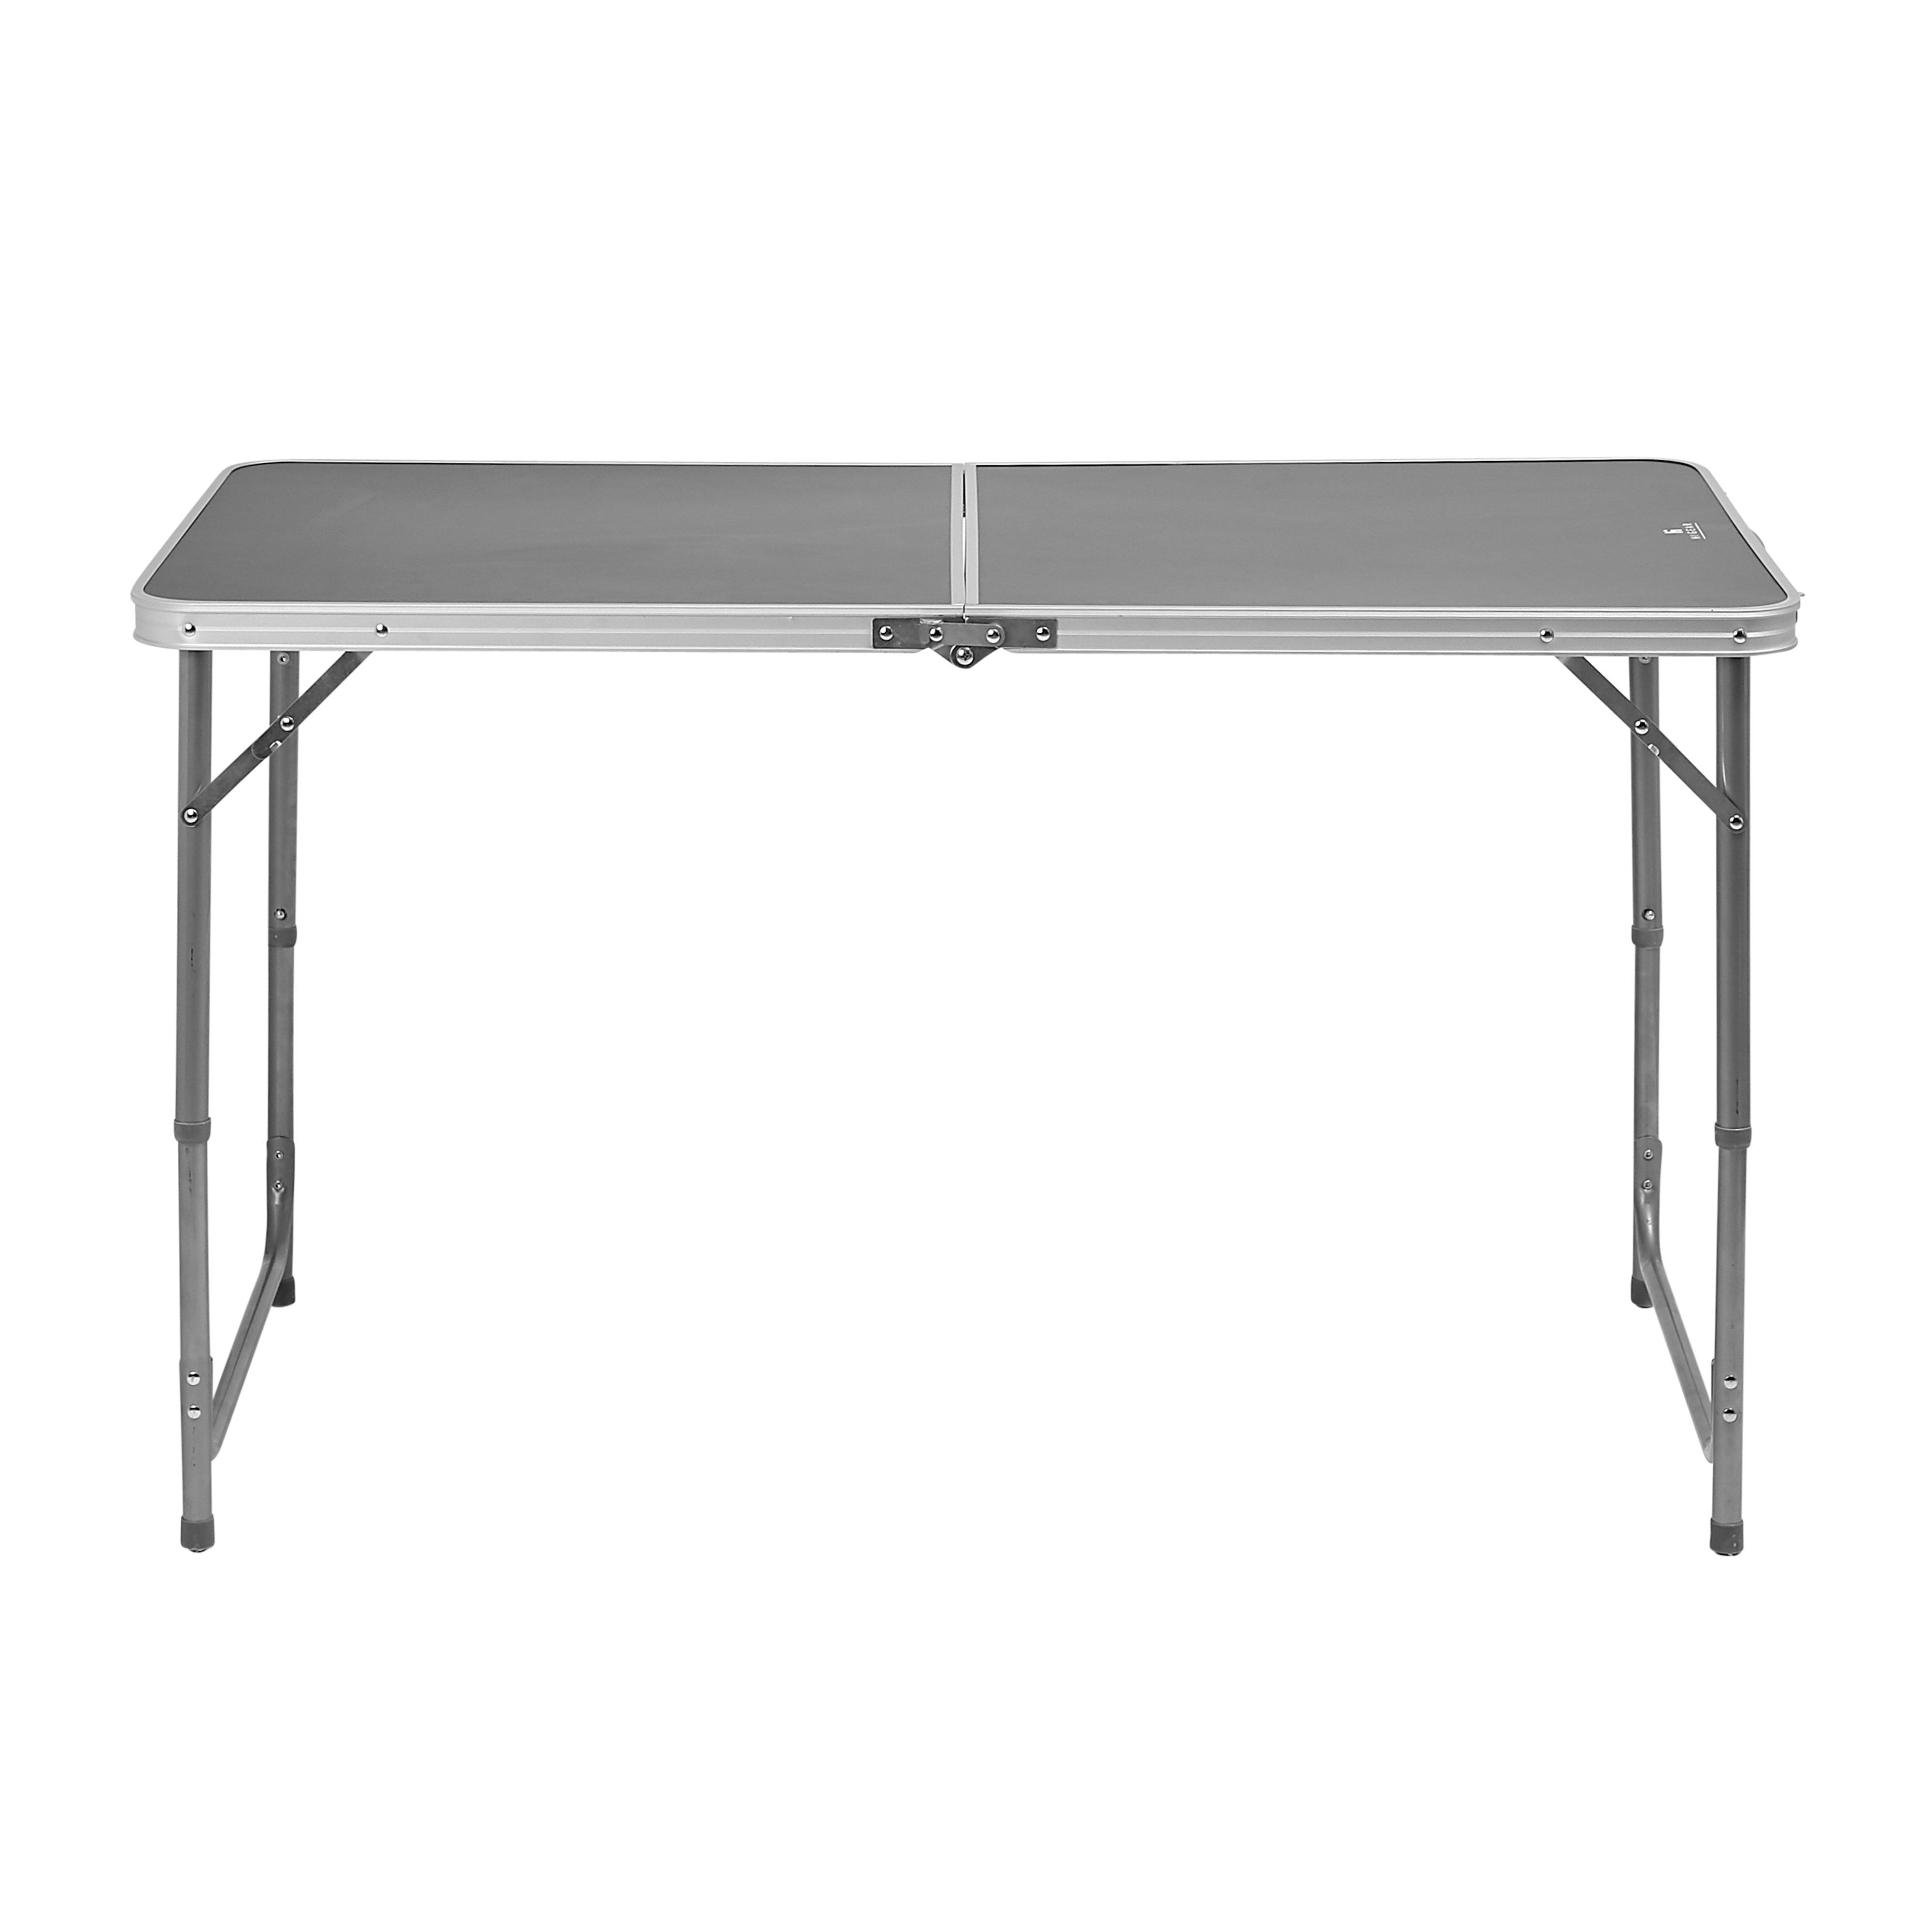 Hi-Gear Double Picnic Table Review